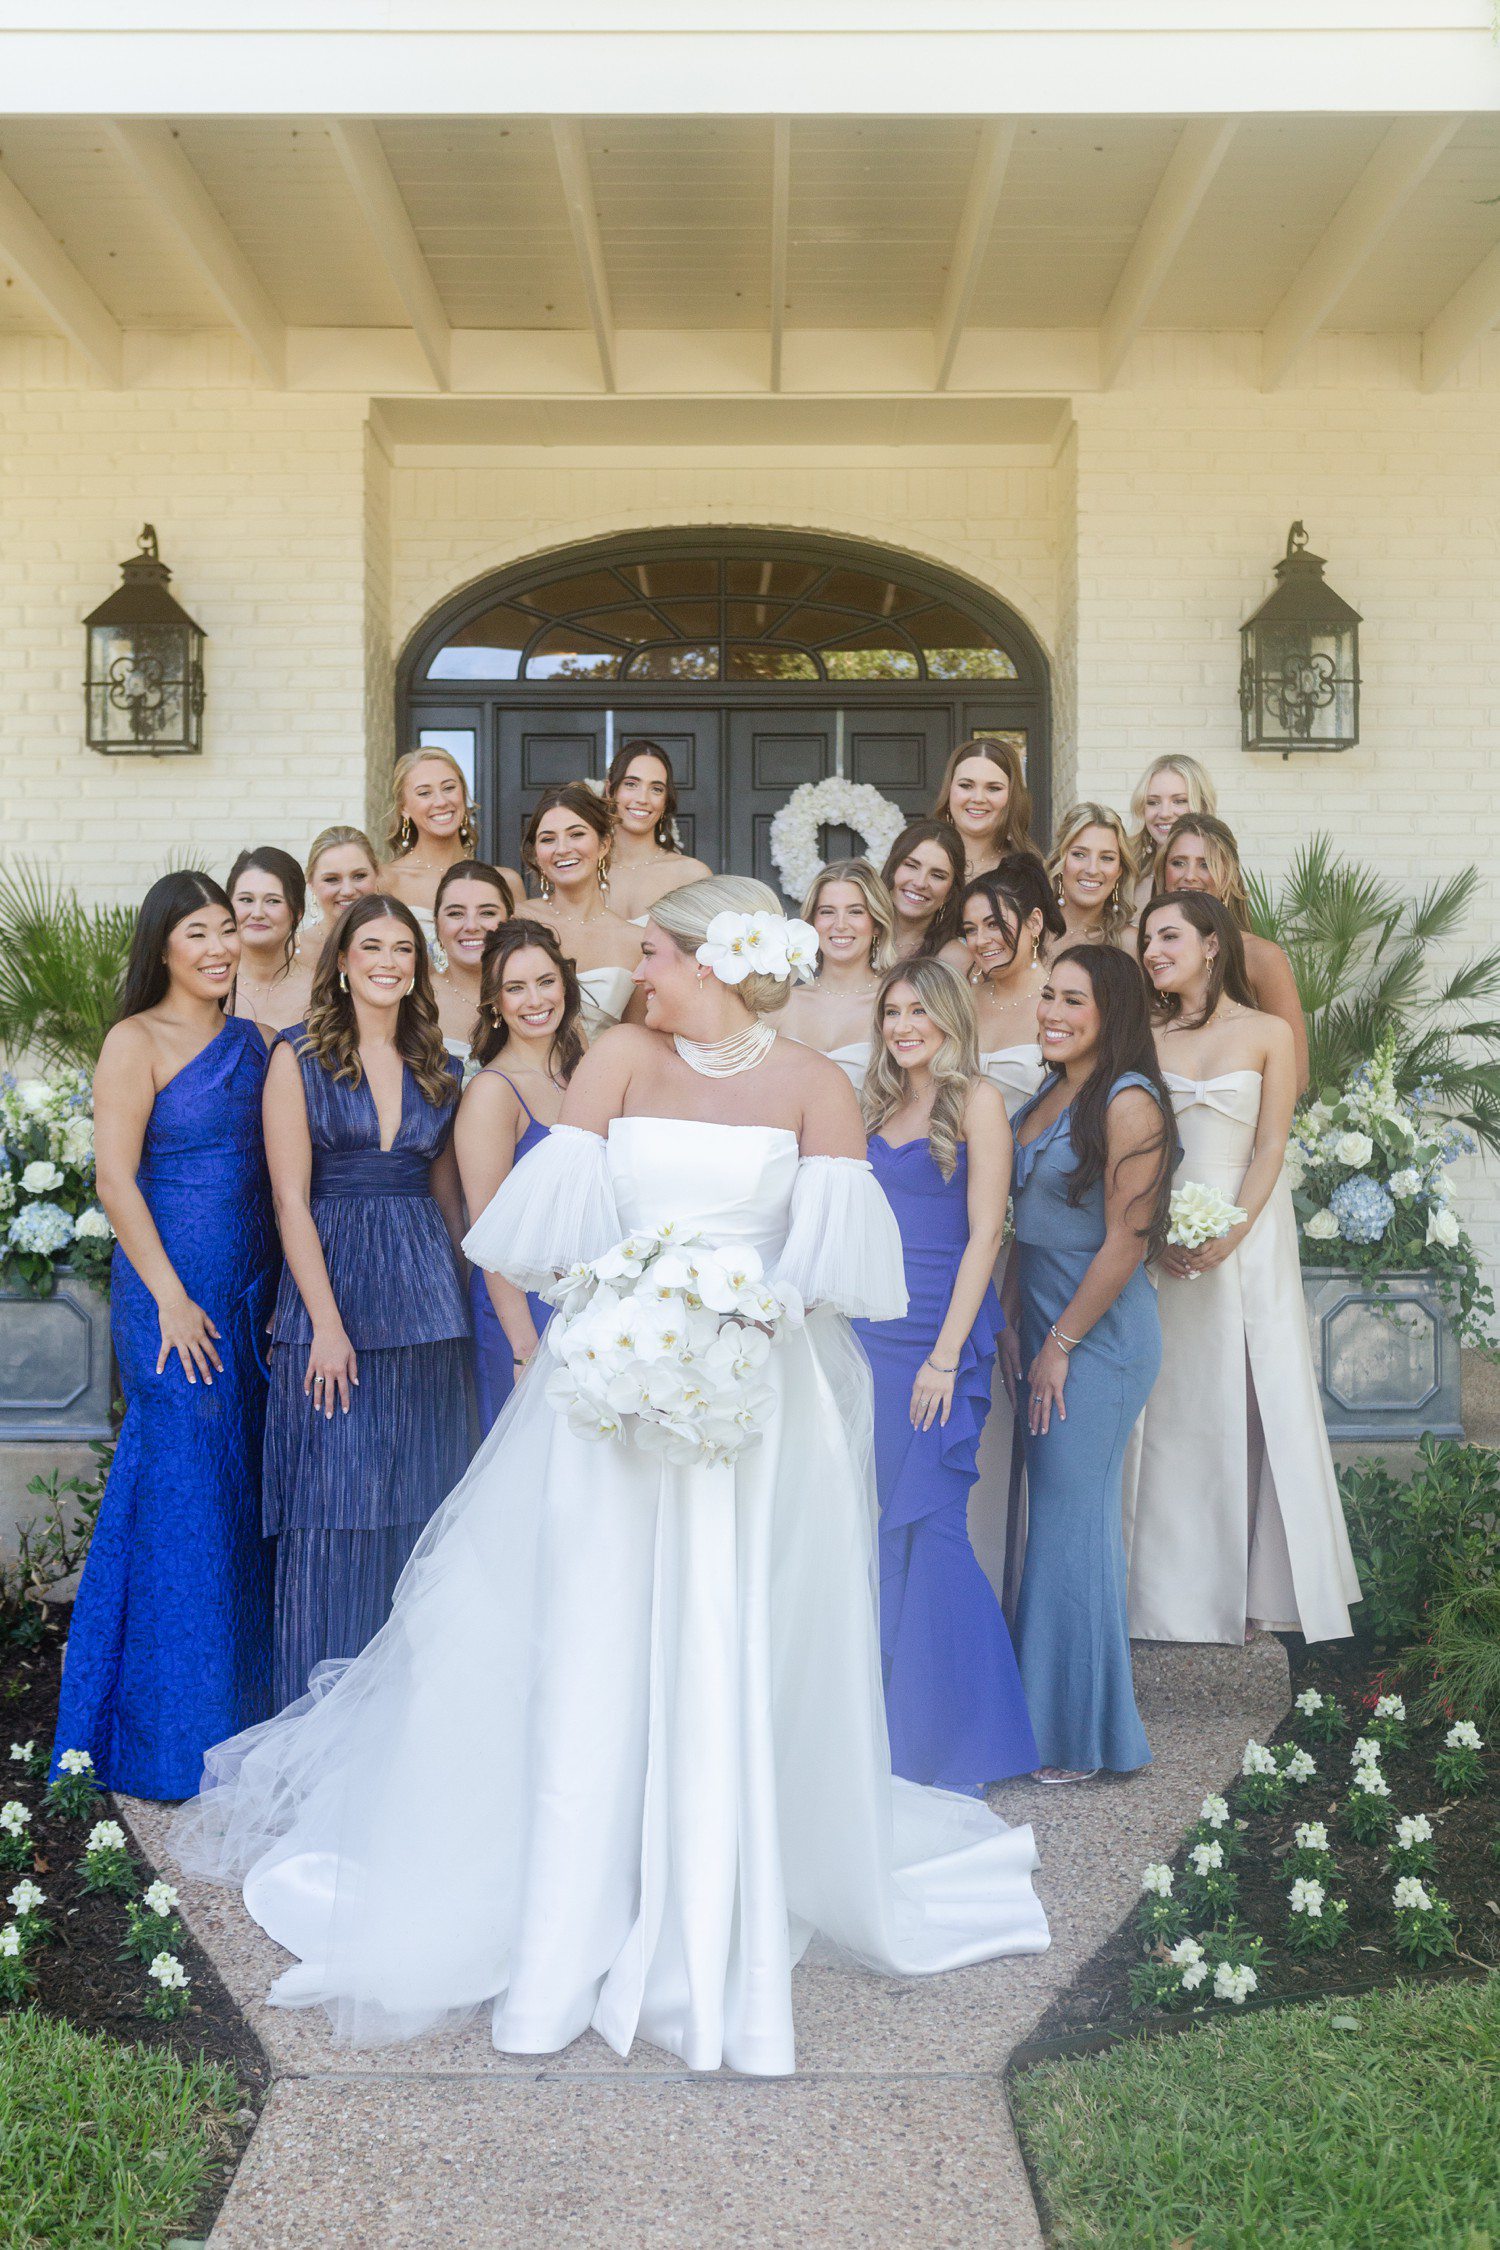 Bride and bridesmaids in blue and champagne bridesmaid dresses.